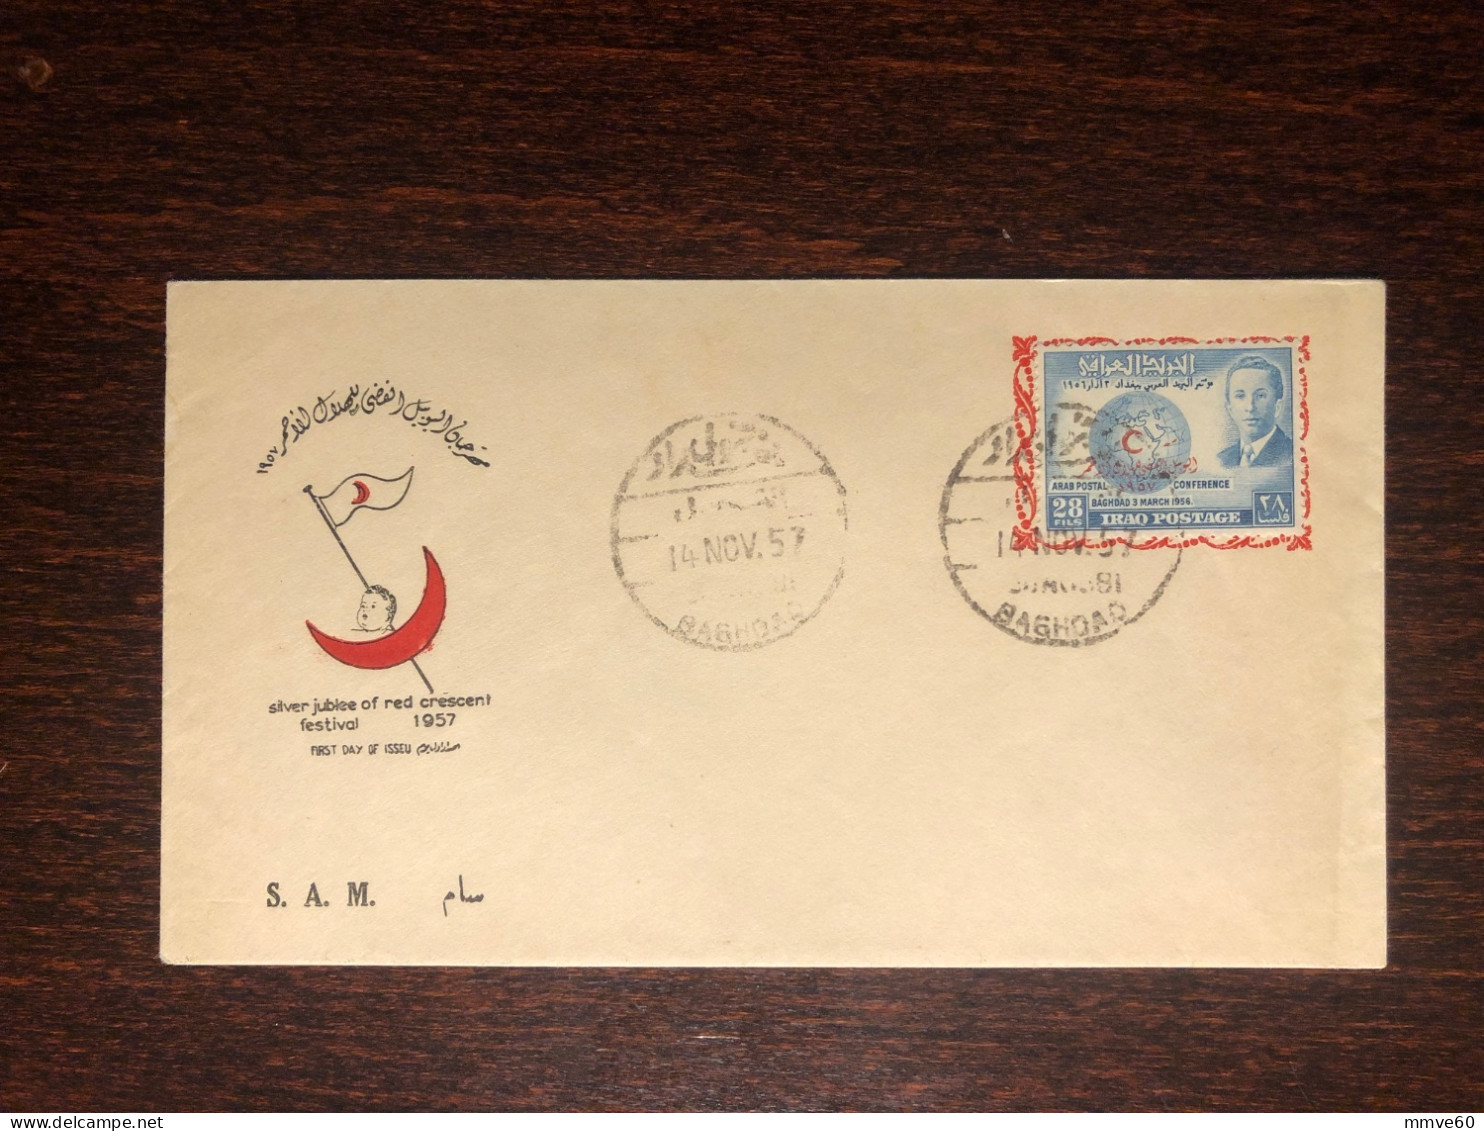 IRAQ FDC COVER 1957 YEAR RED CRESCENT RED CROSS MEDICINE STAMPS - Iraq